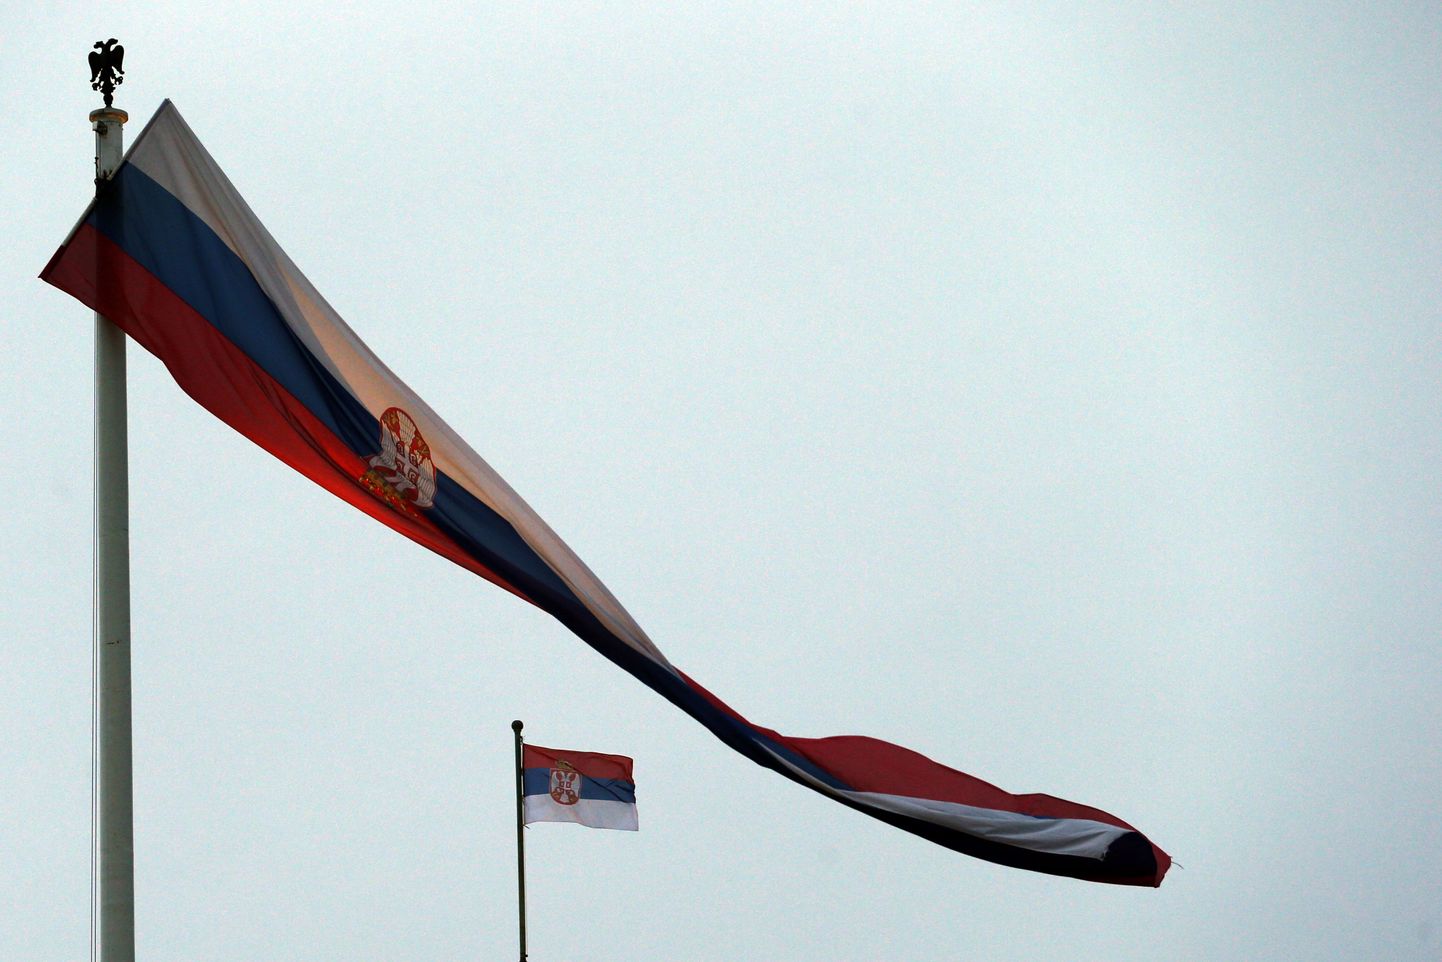 Serbian flags wave in front of the Serbian Parliament building in Belgrade, Serbia, Friday, Dec. 26, 2014. Serbia will be next chairmanship of the Organization for Security and Cooperation in Europe (OSCE) in 2015. (AP Photo/Darko Vojinovic)